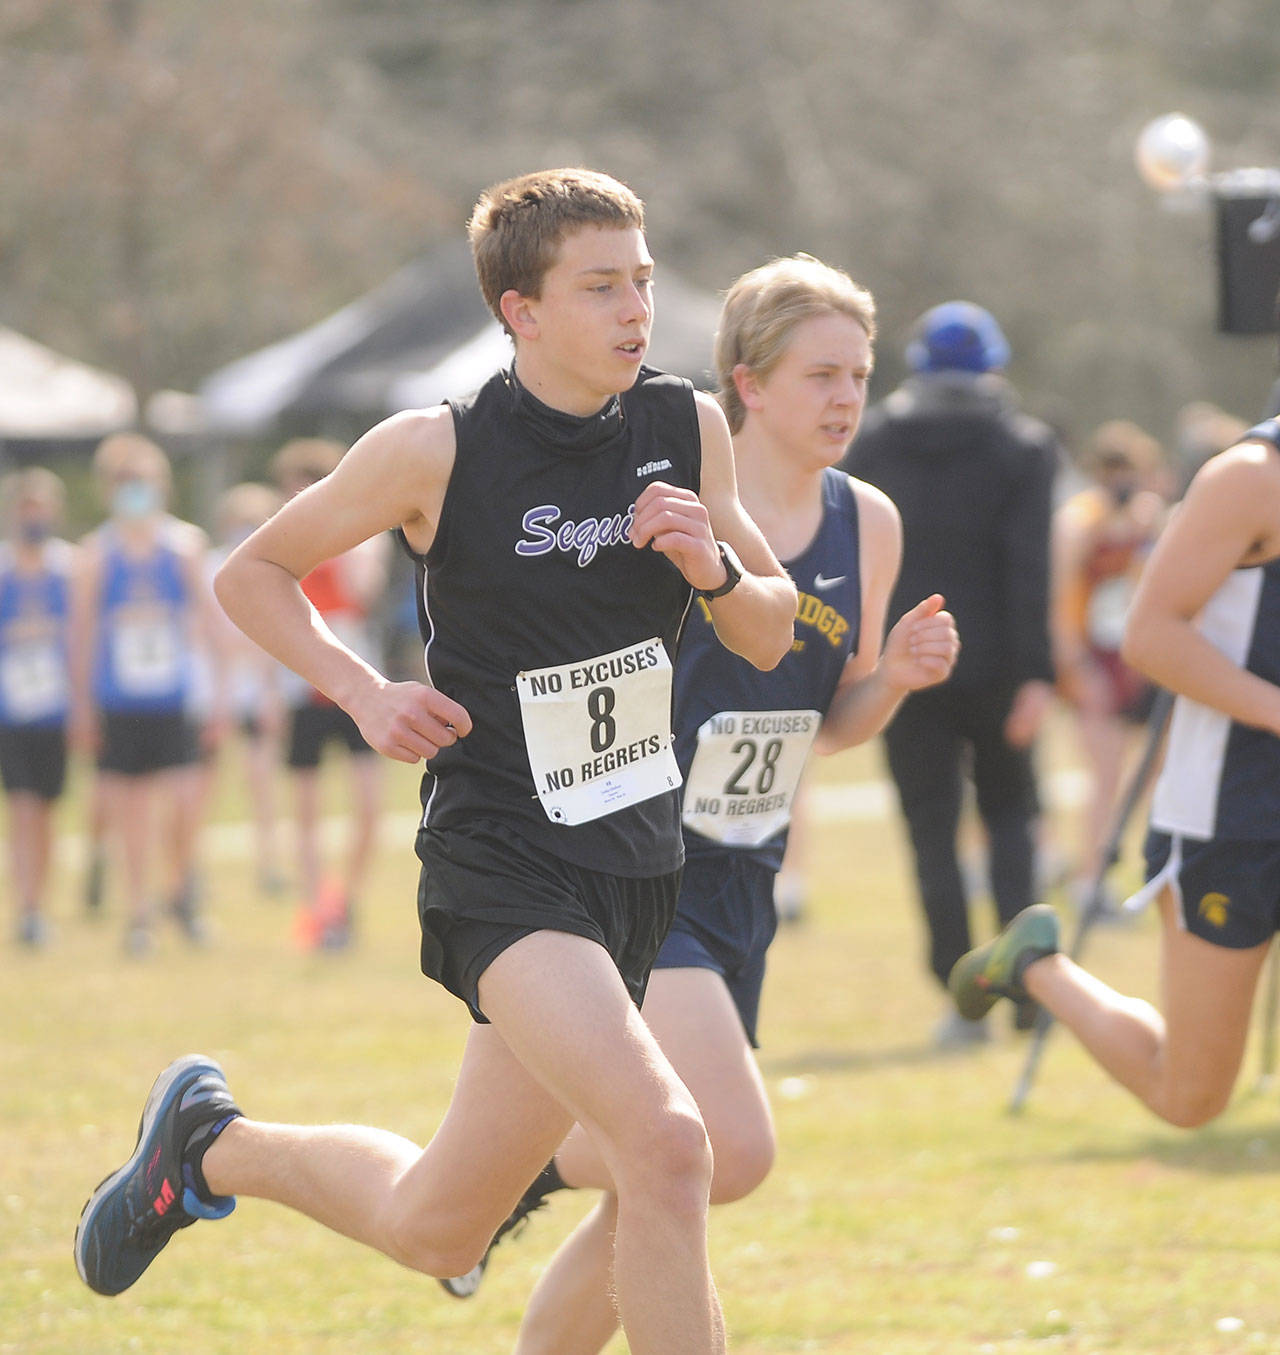 Sequim High freshman Colby Ellefson races in the Olympic League championship race on March 13 at Battle Point Park on Bainbridge Island. Ellefson finished seventh overall to lead the Wolves, who placed eighth as a team. Sequim Gazette photo by Michael Dashiell